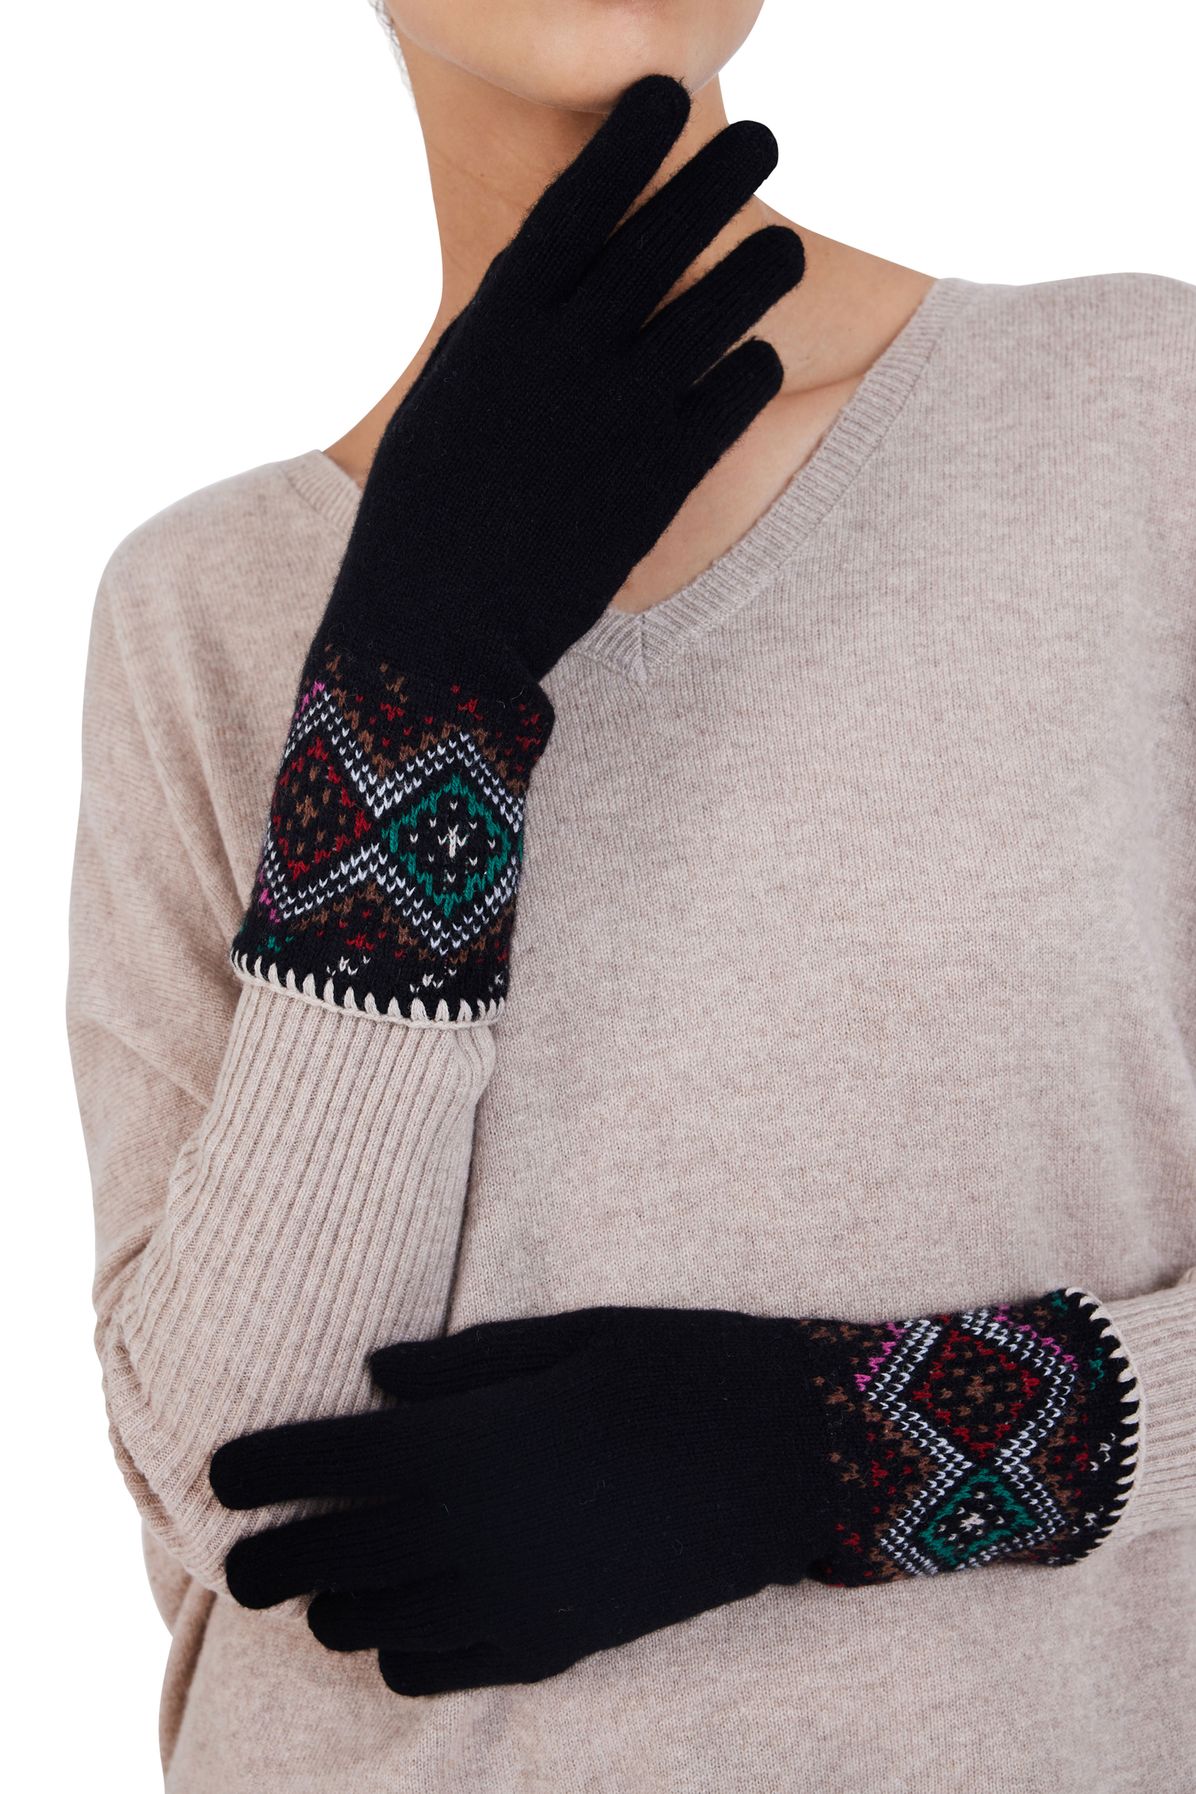  Daruda wool and cashmere gloves with Slavic pattern